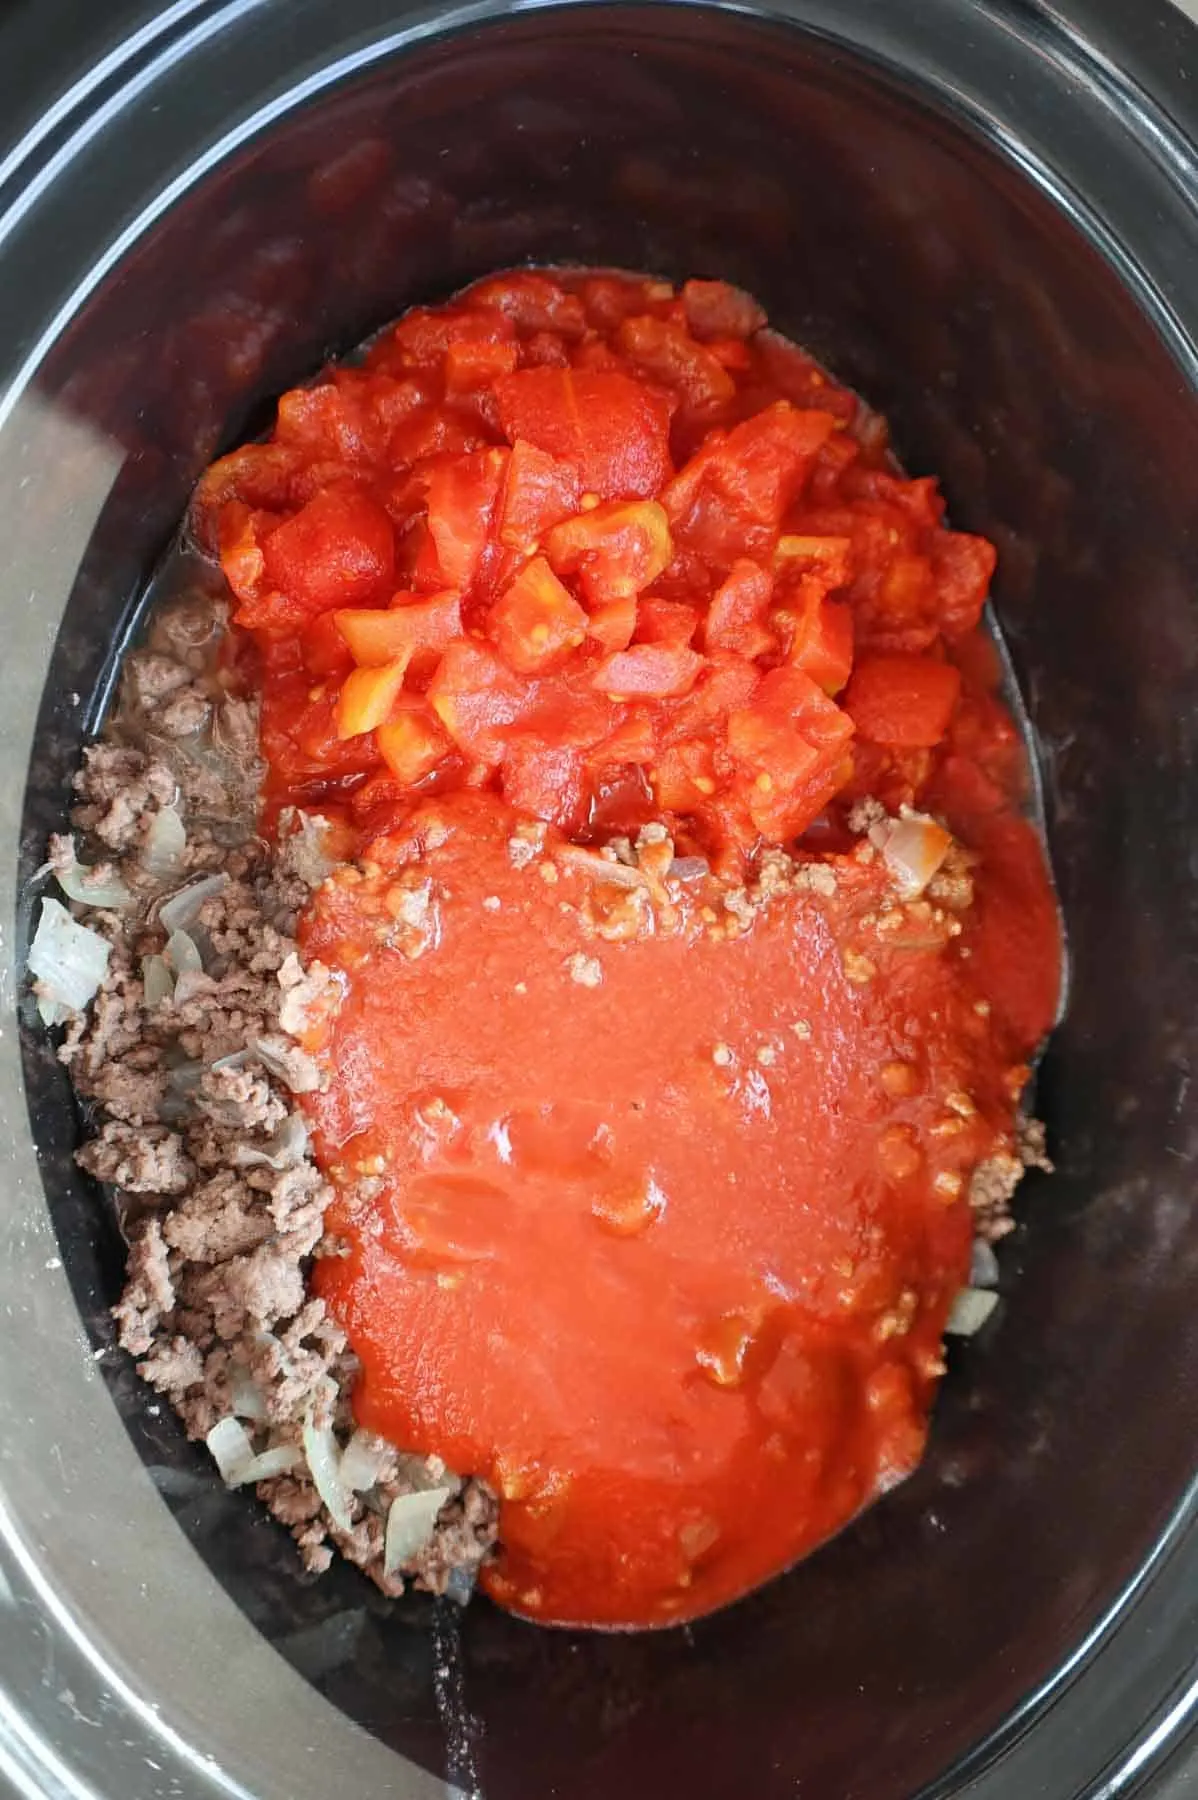 diced tomatoes and tomato sauce on top of cooked ground beef in a slow cooker